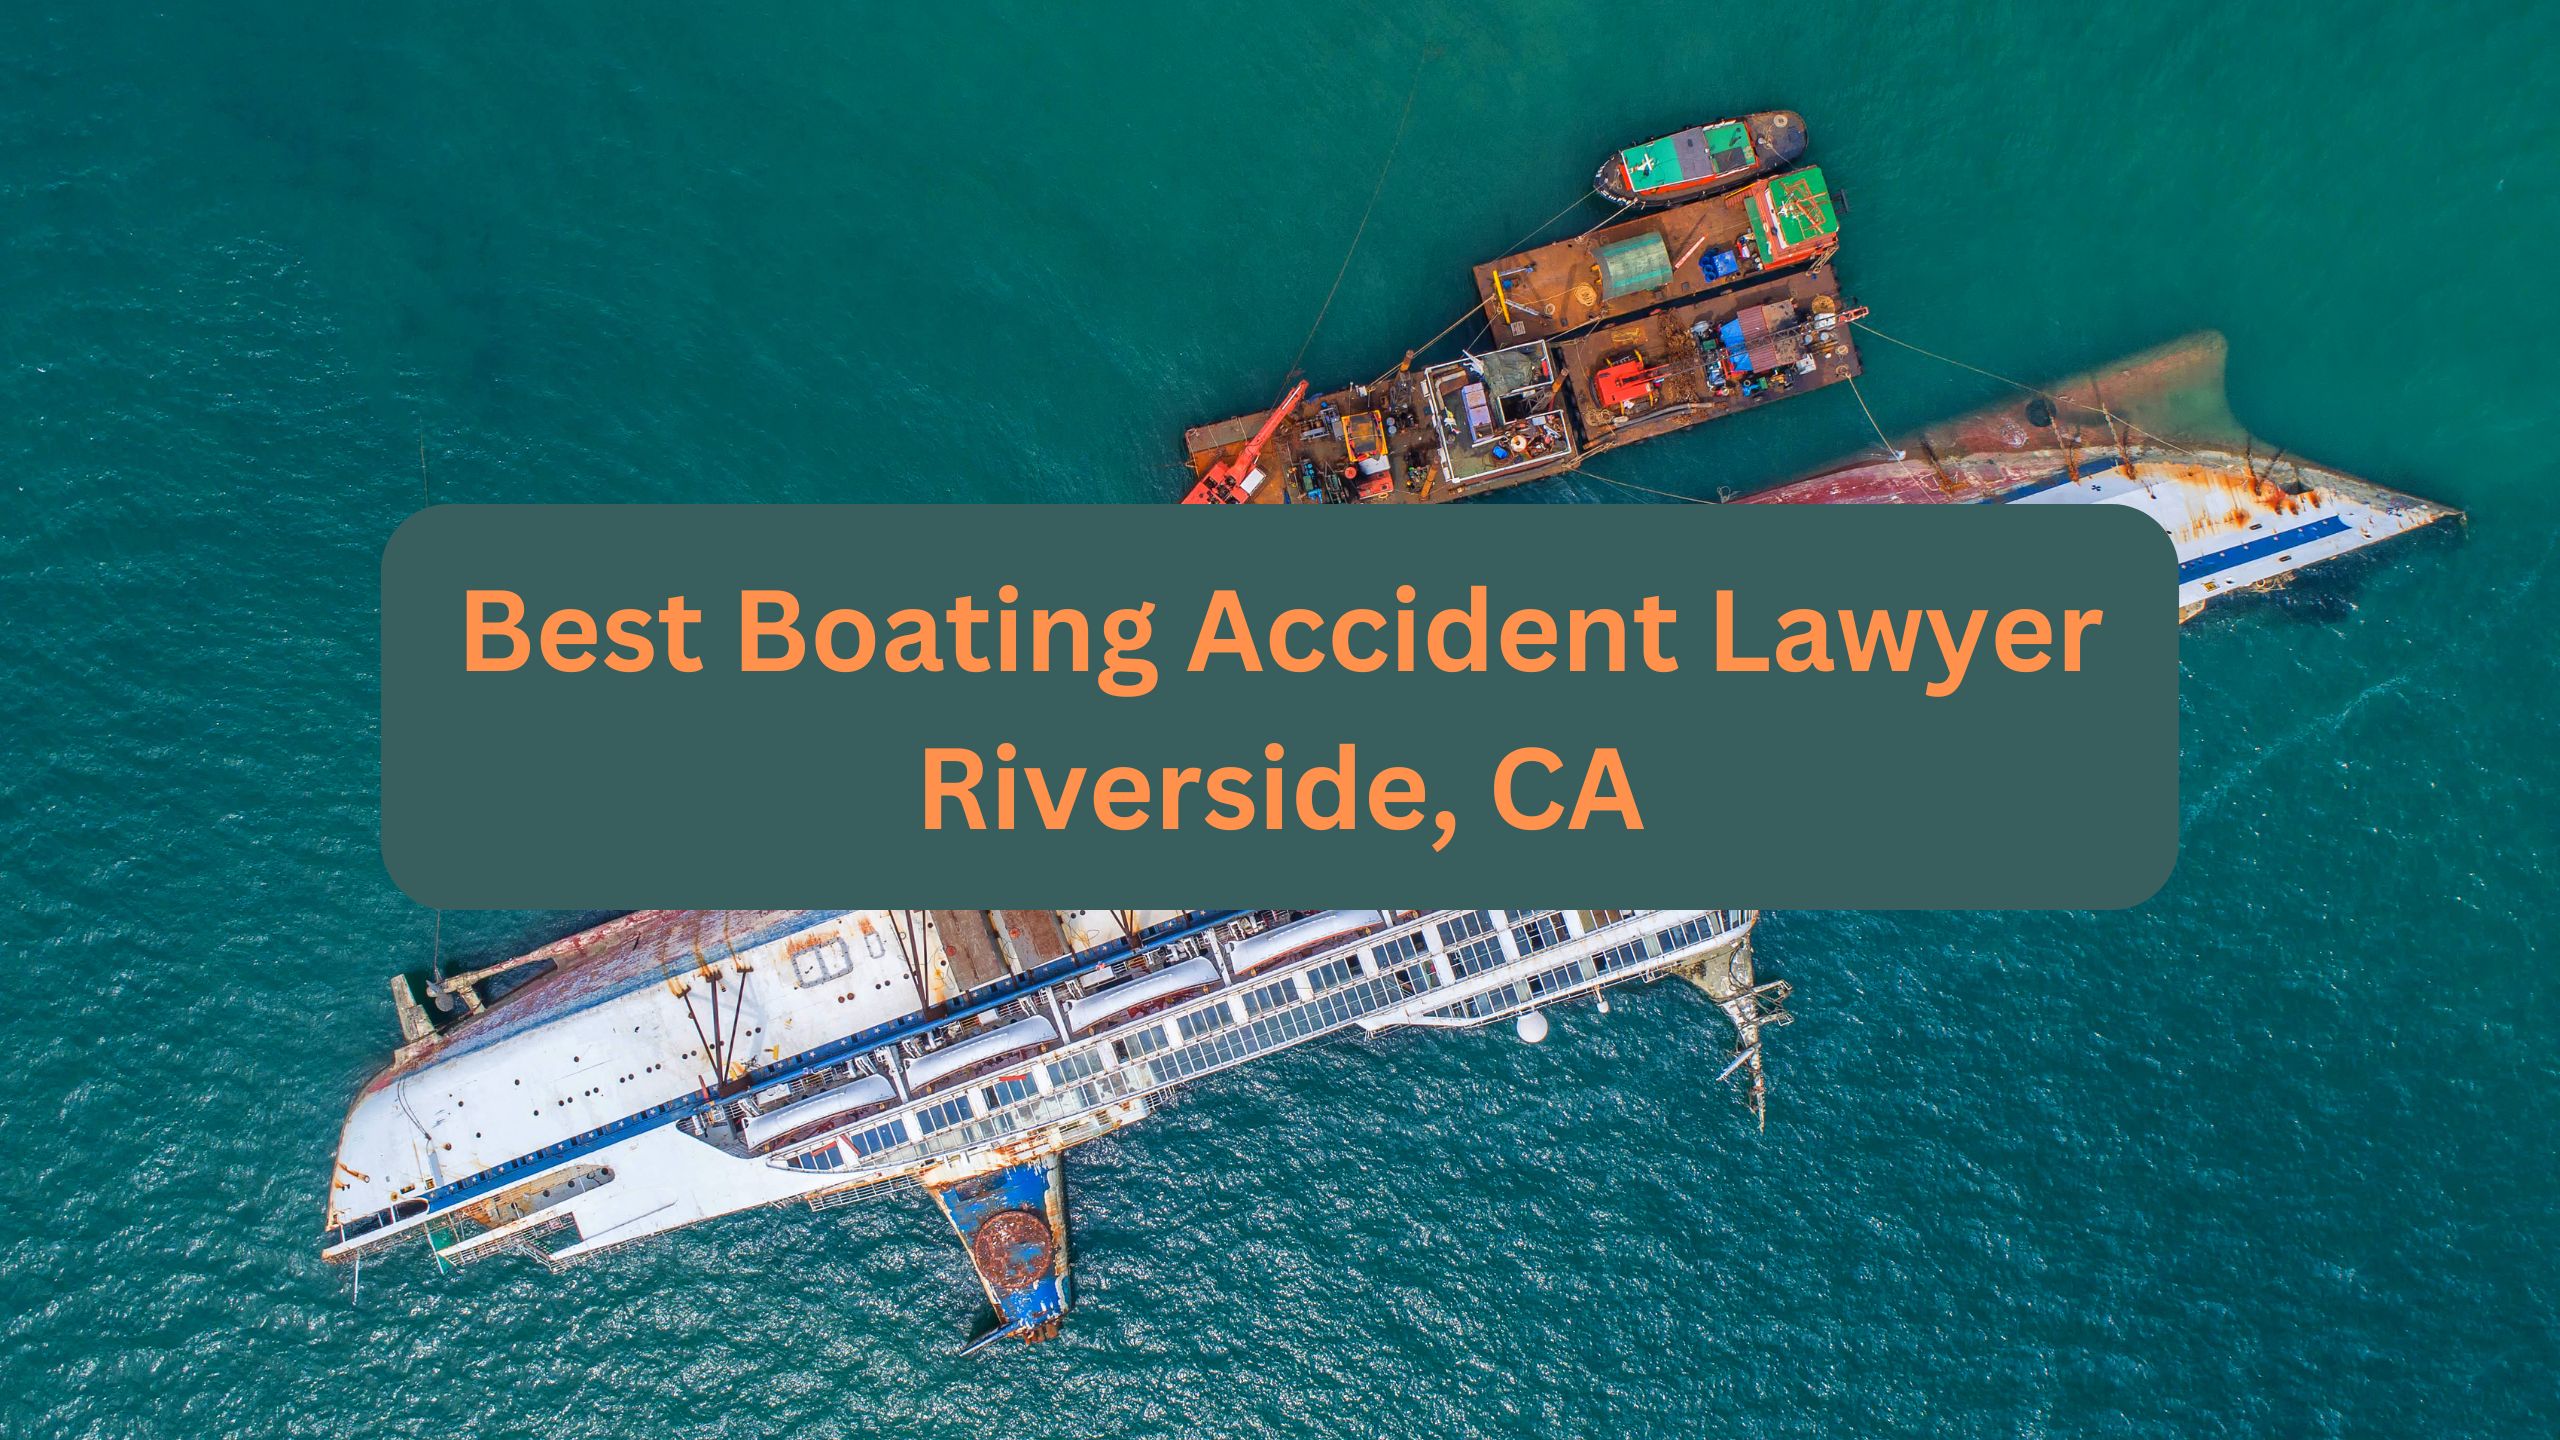 Best Boating Accident Lawyer Riverside